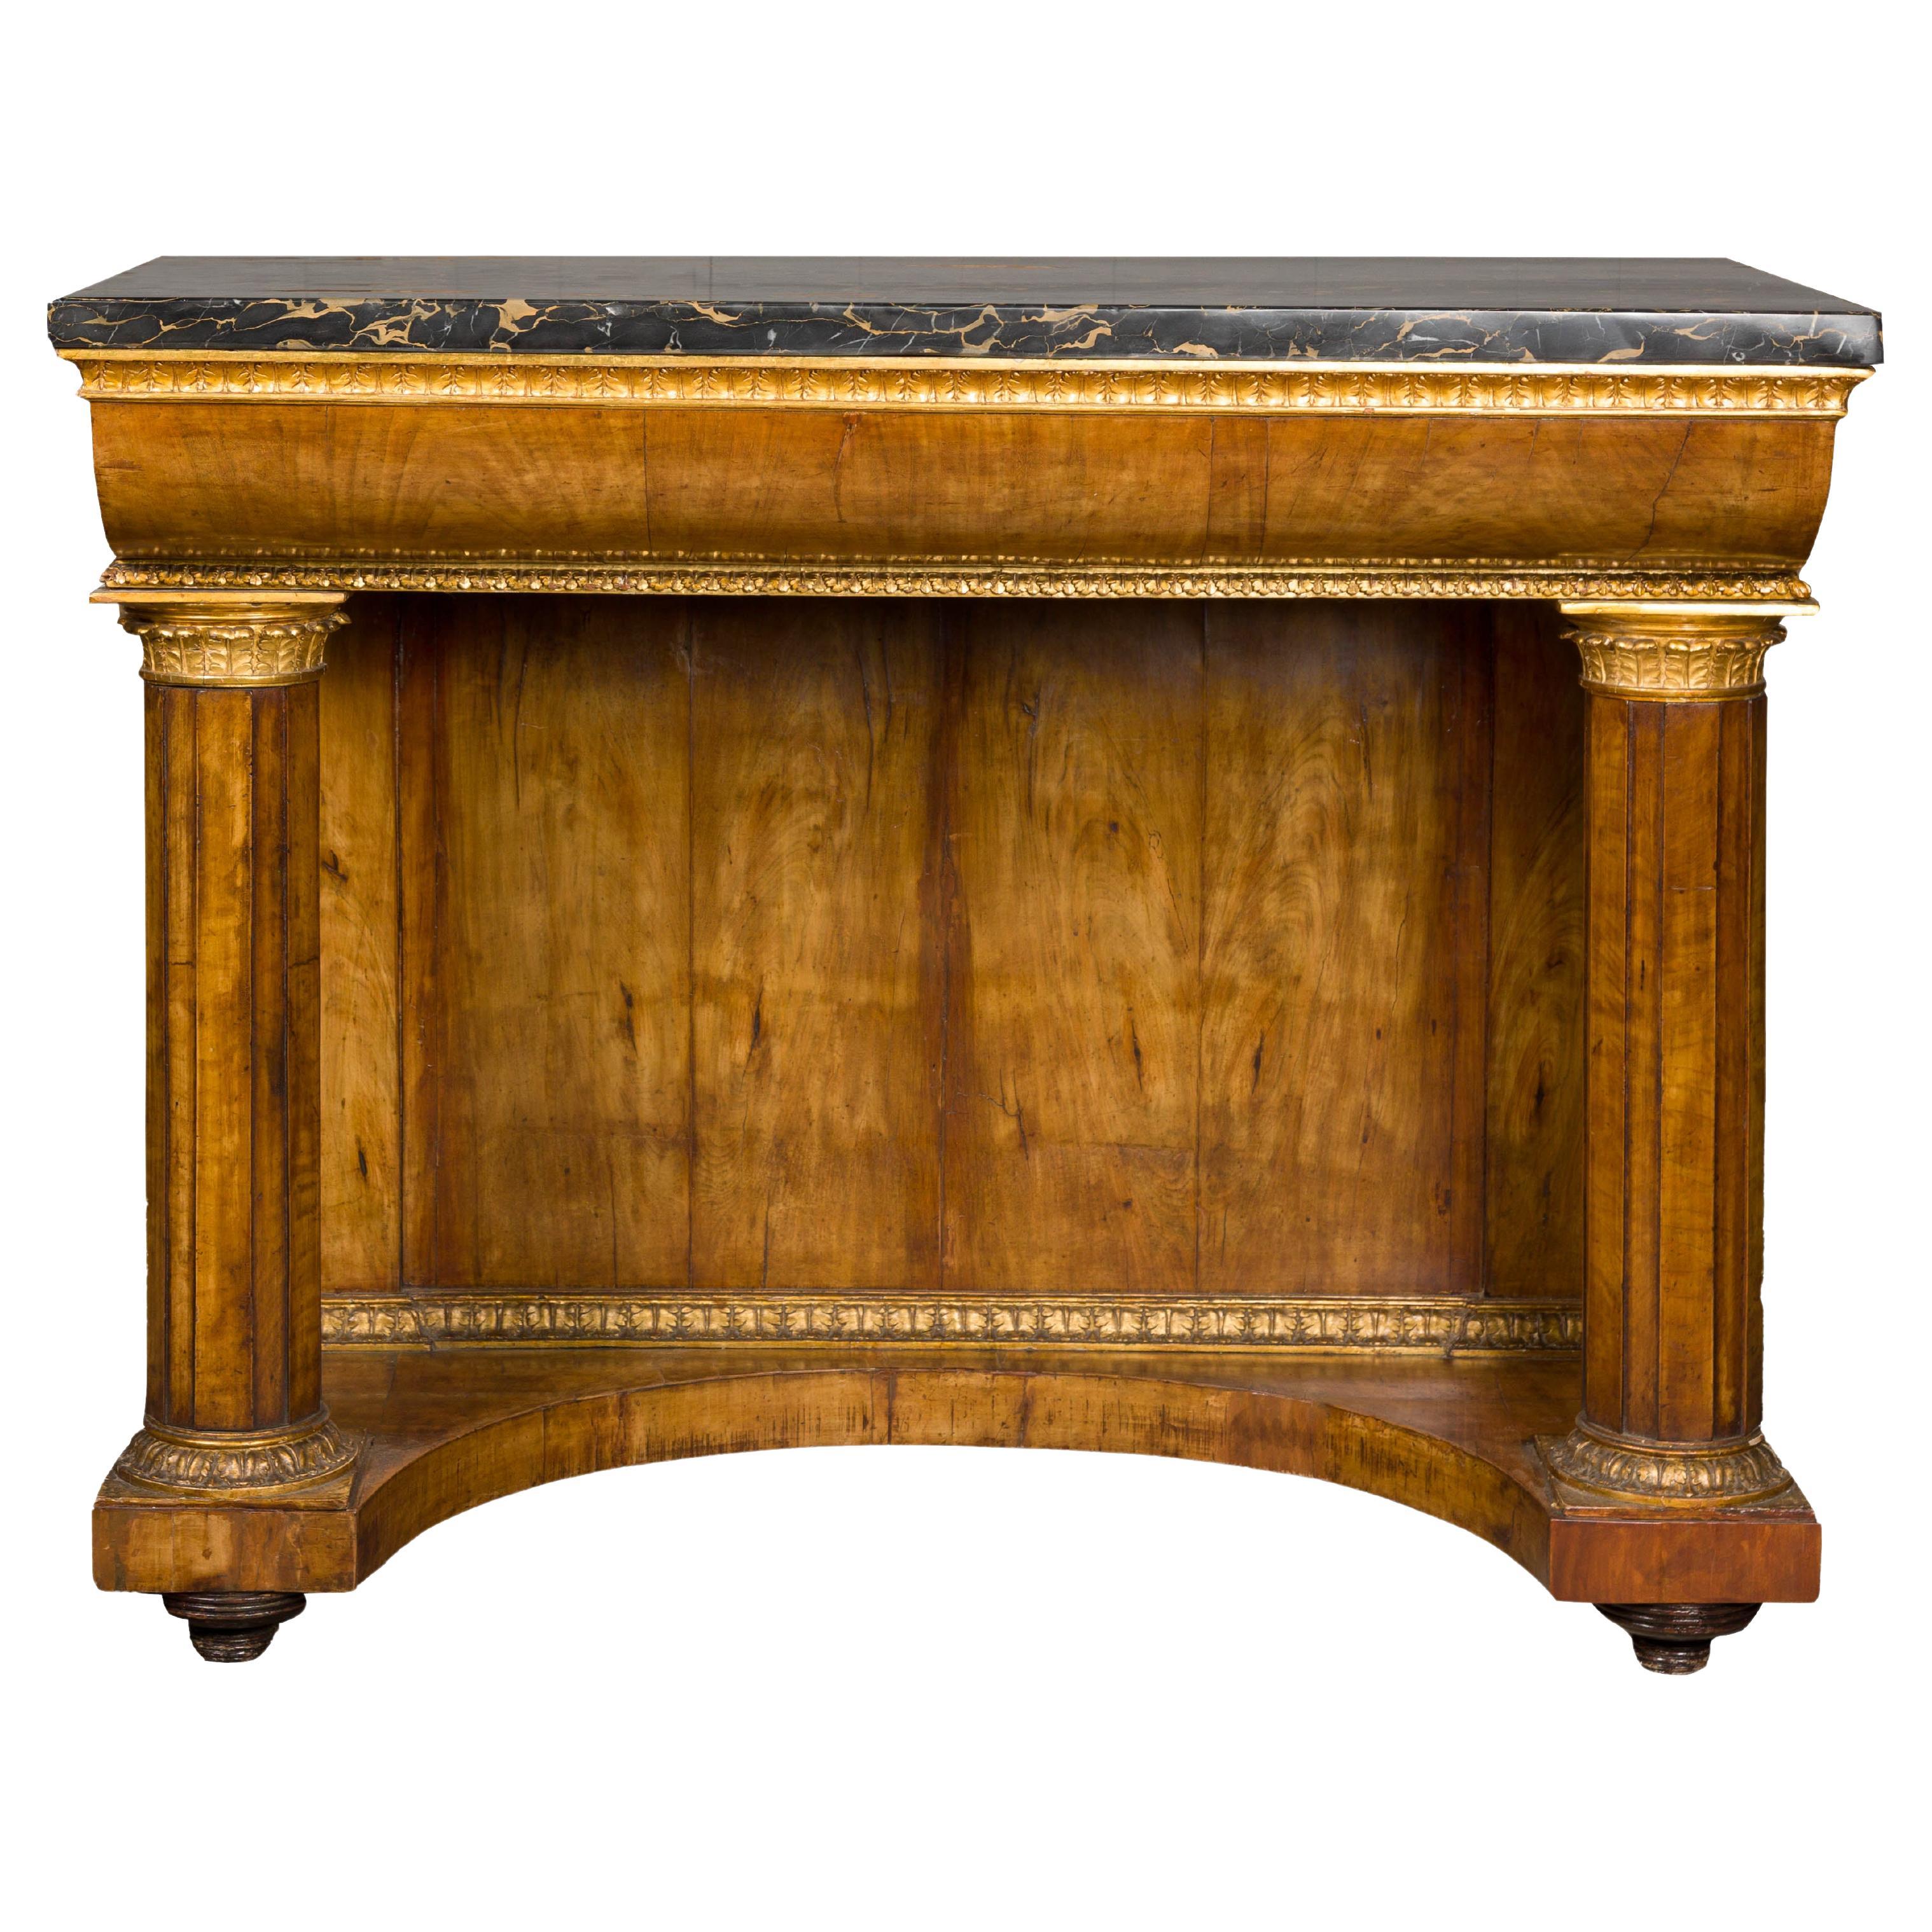 French Napoléon III Period 1860s Walnut Console Table with Original Marble Top